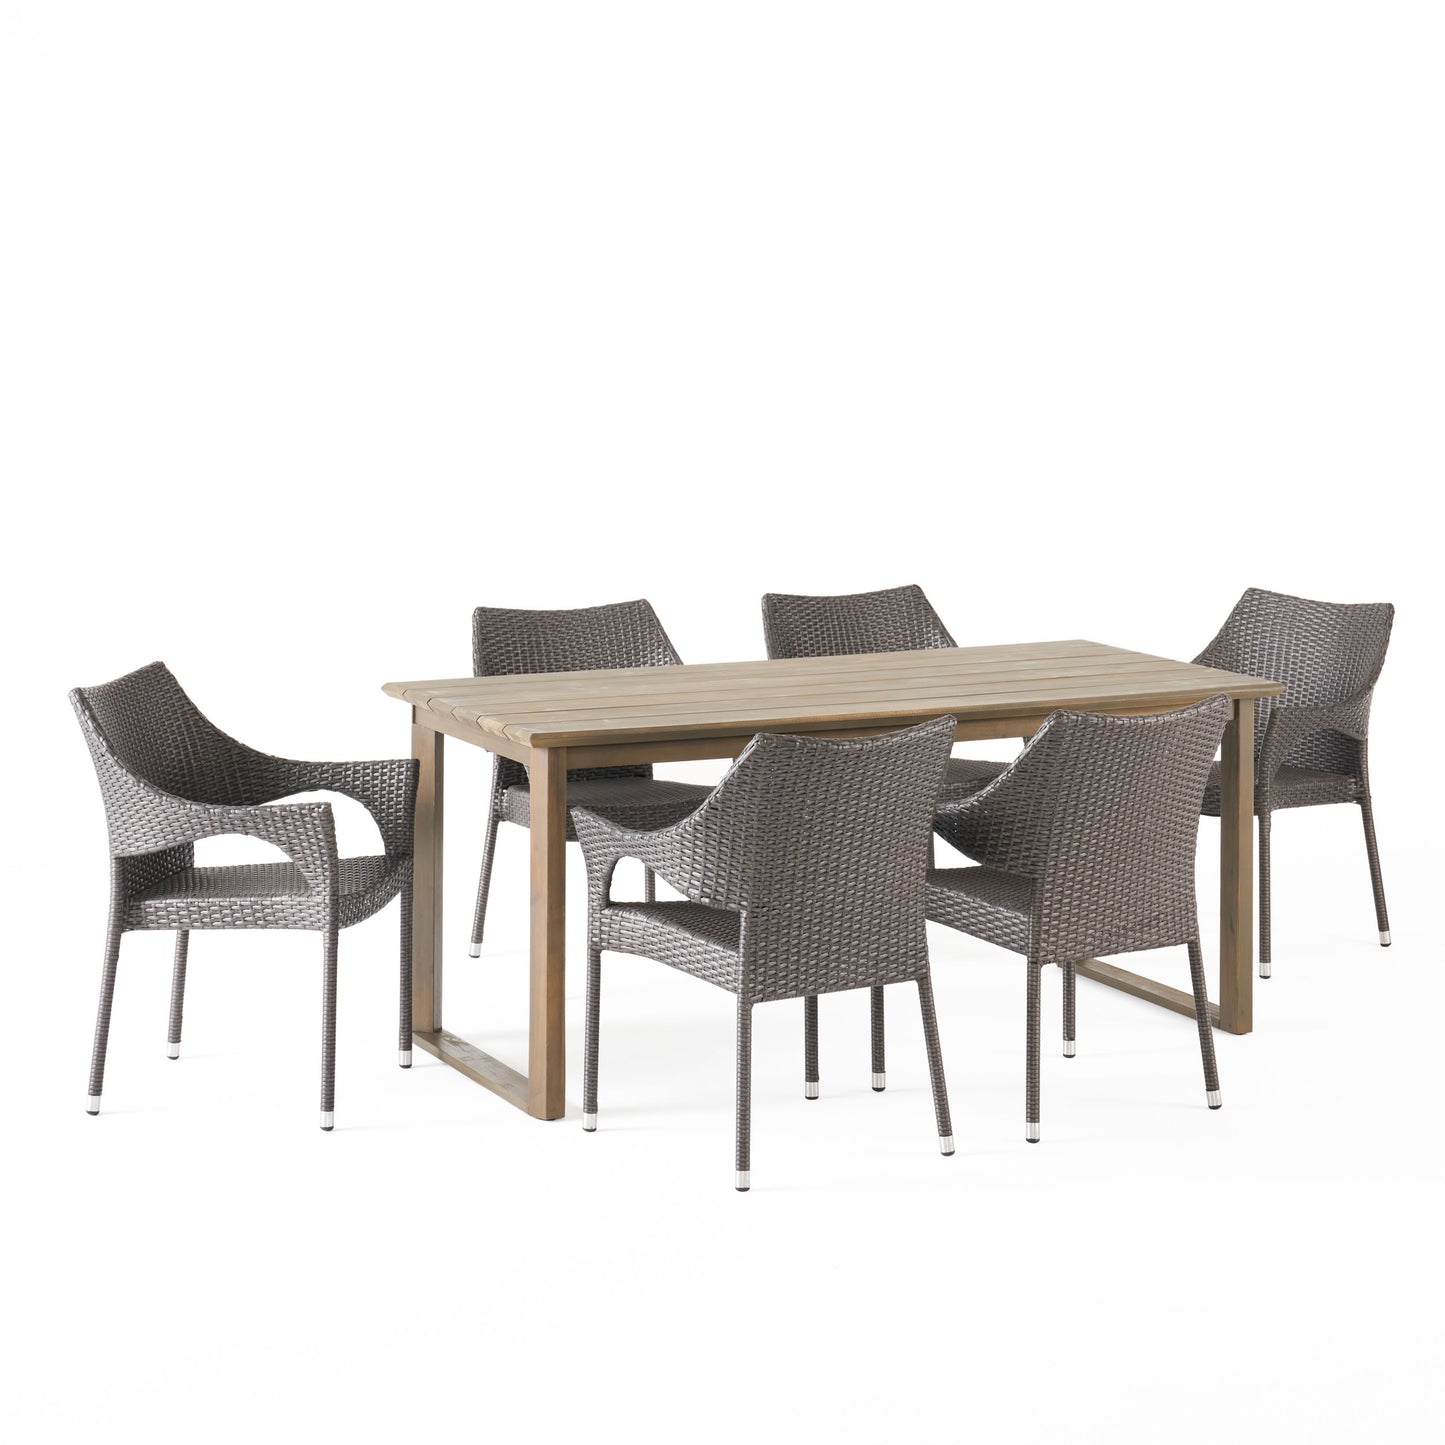 Ellendale Outdoor Acacia Wood and Wicker 7 Piece Dining Set